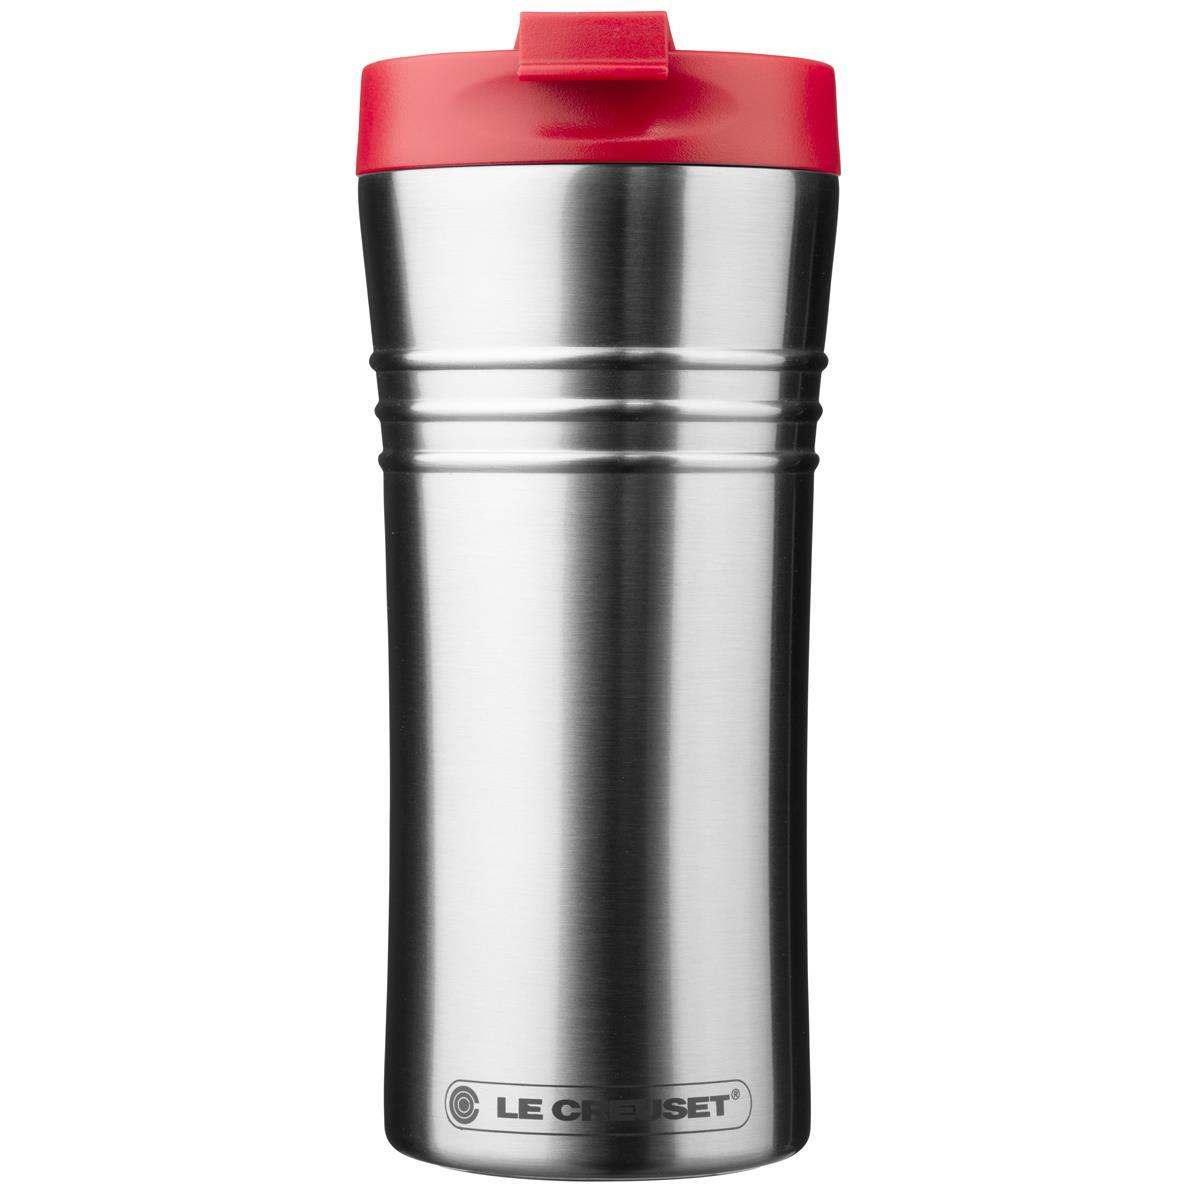 What is the duration of the guarantee for the Le Creuset travel mug?